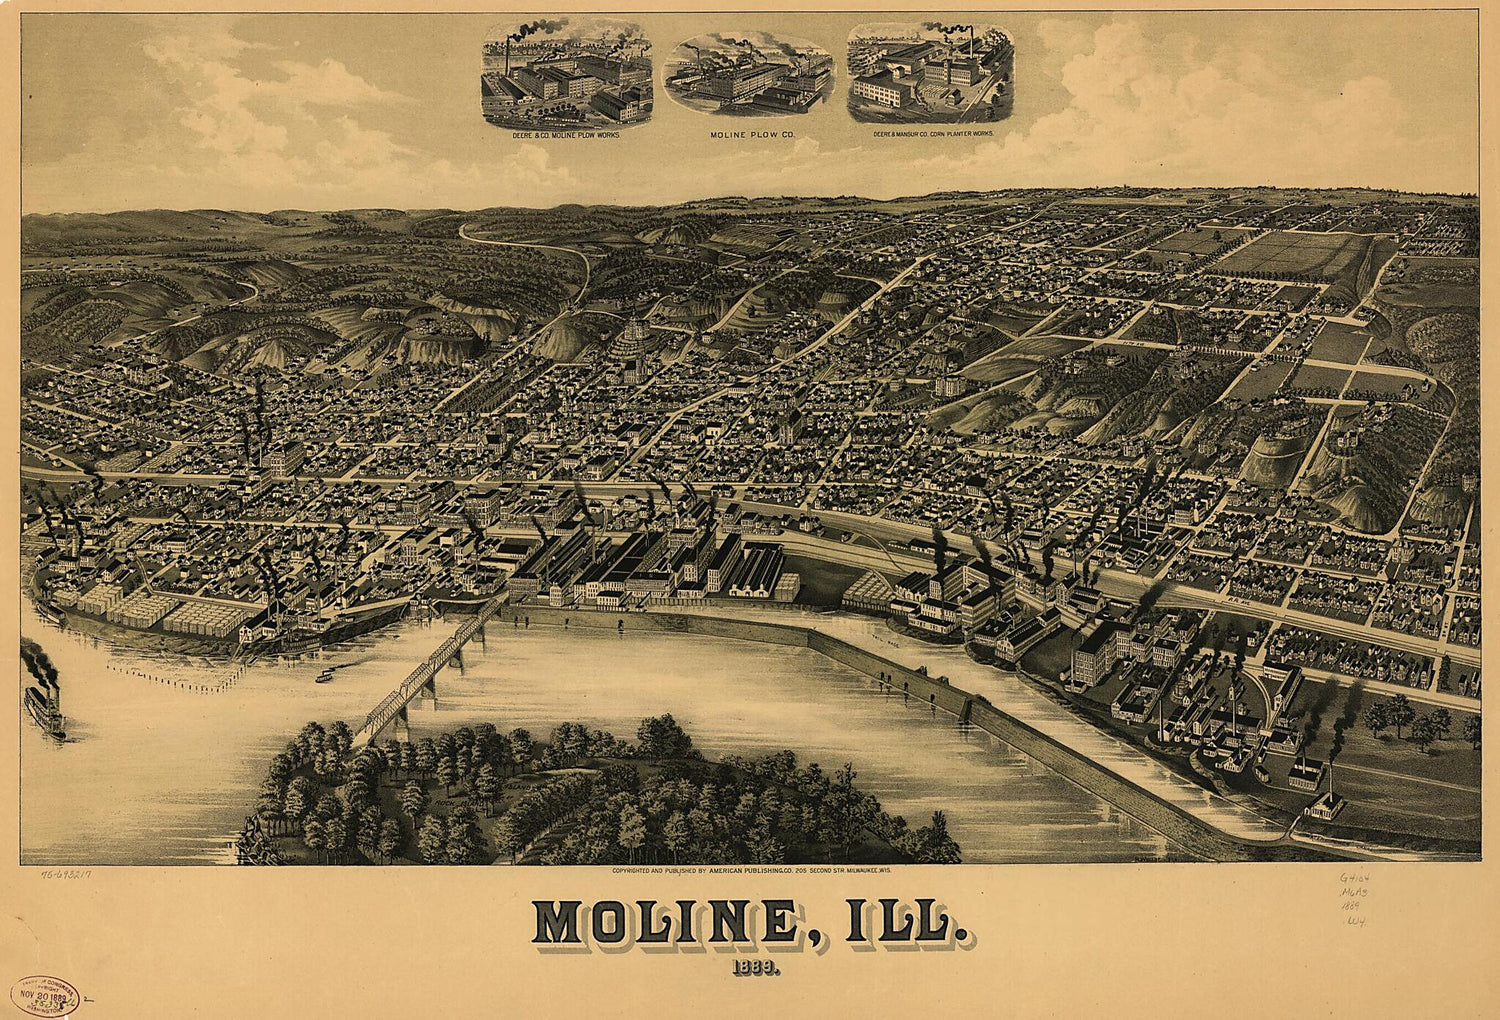 This old map of Moline, Ill. from 1889 was created by Wis.) American Publishing Co. (Milwaukee, H. (Henry) Wellge in 1889